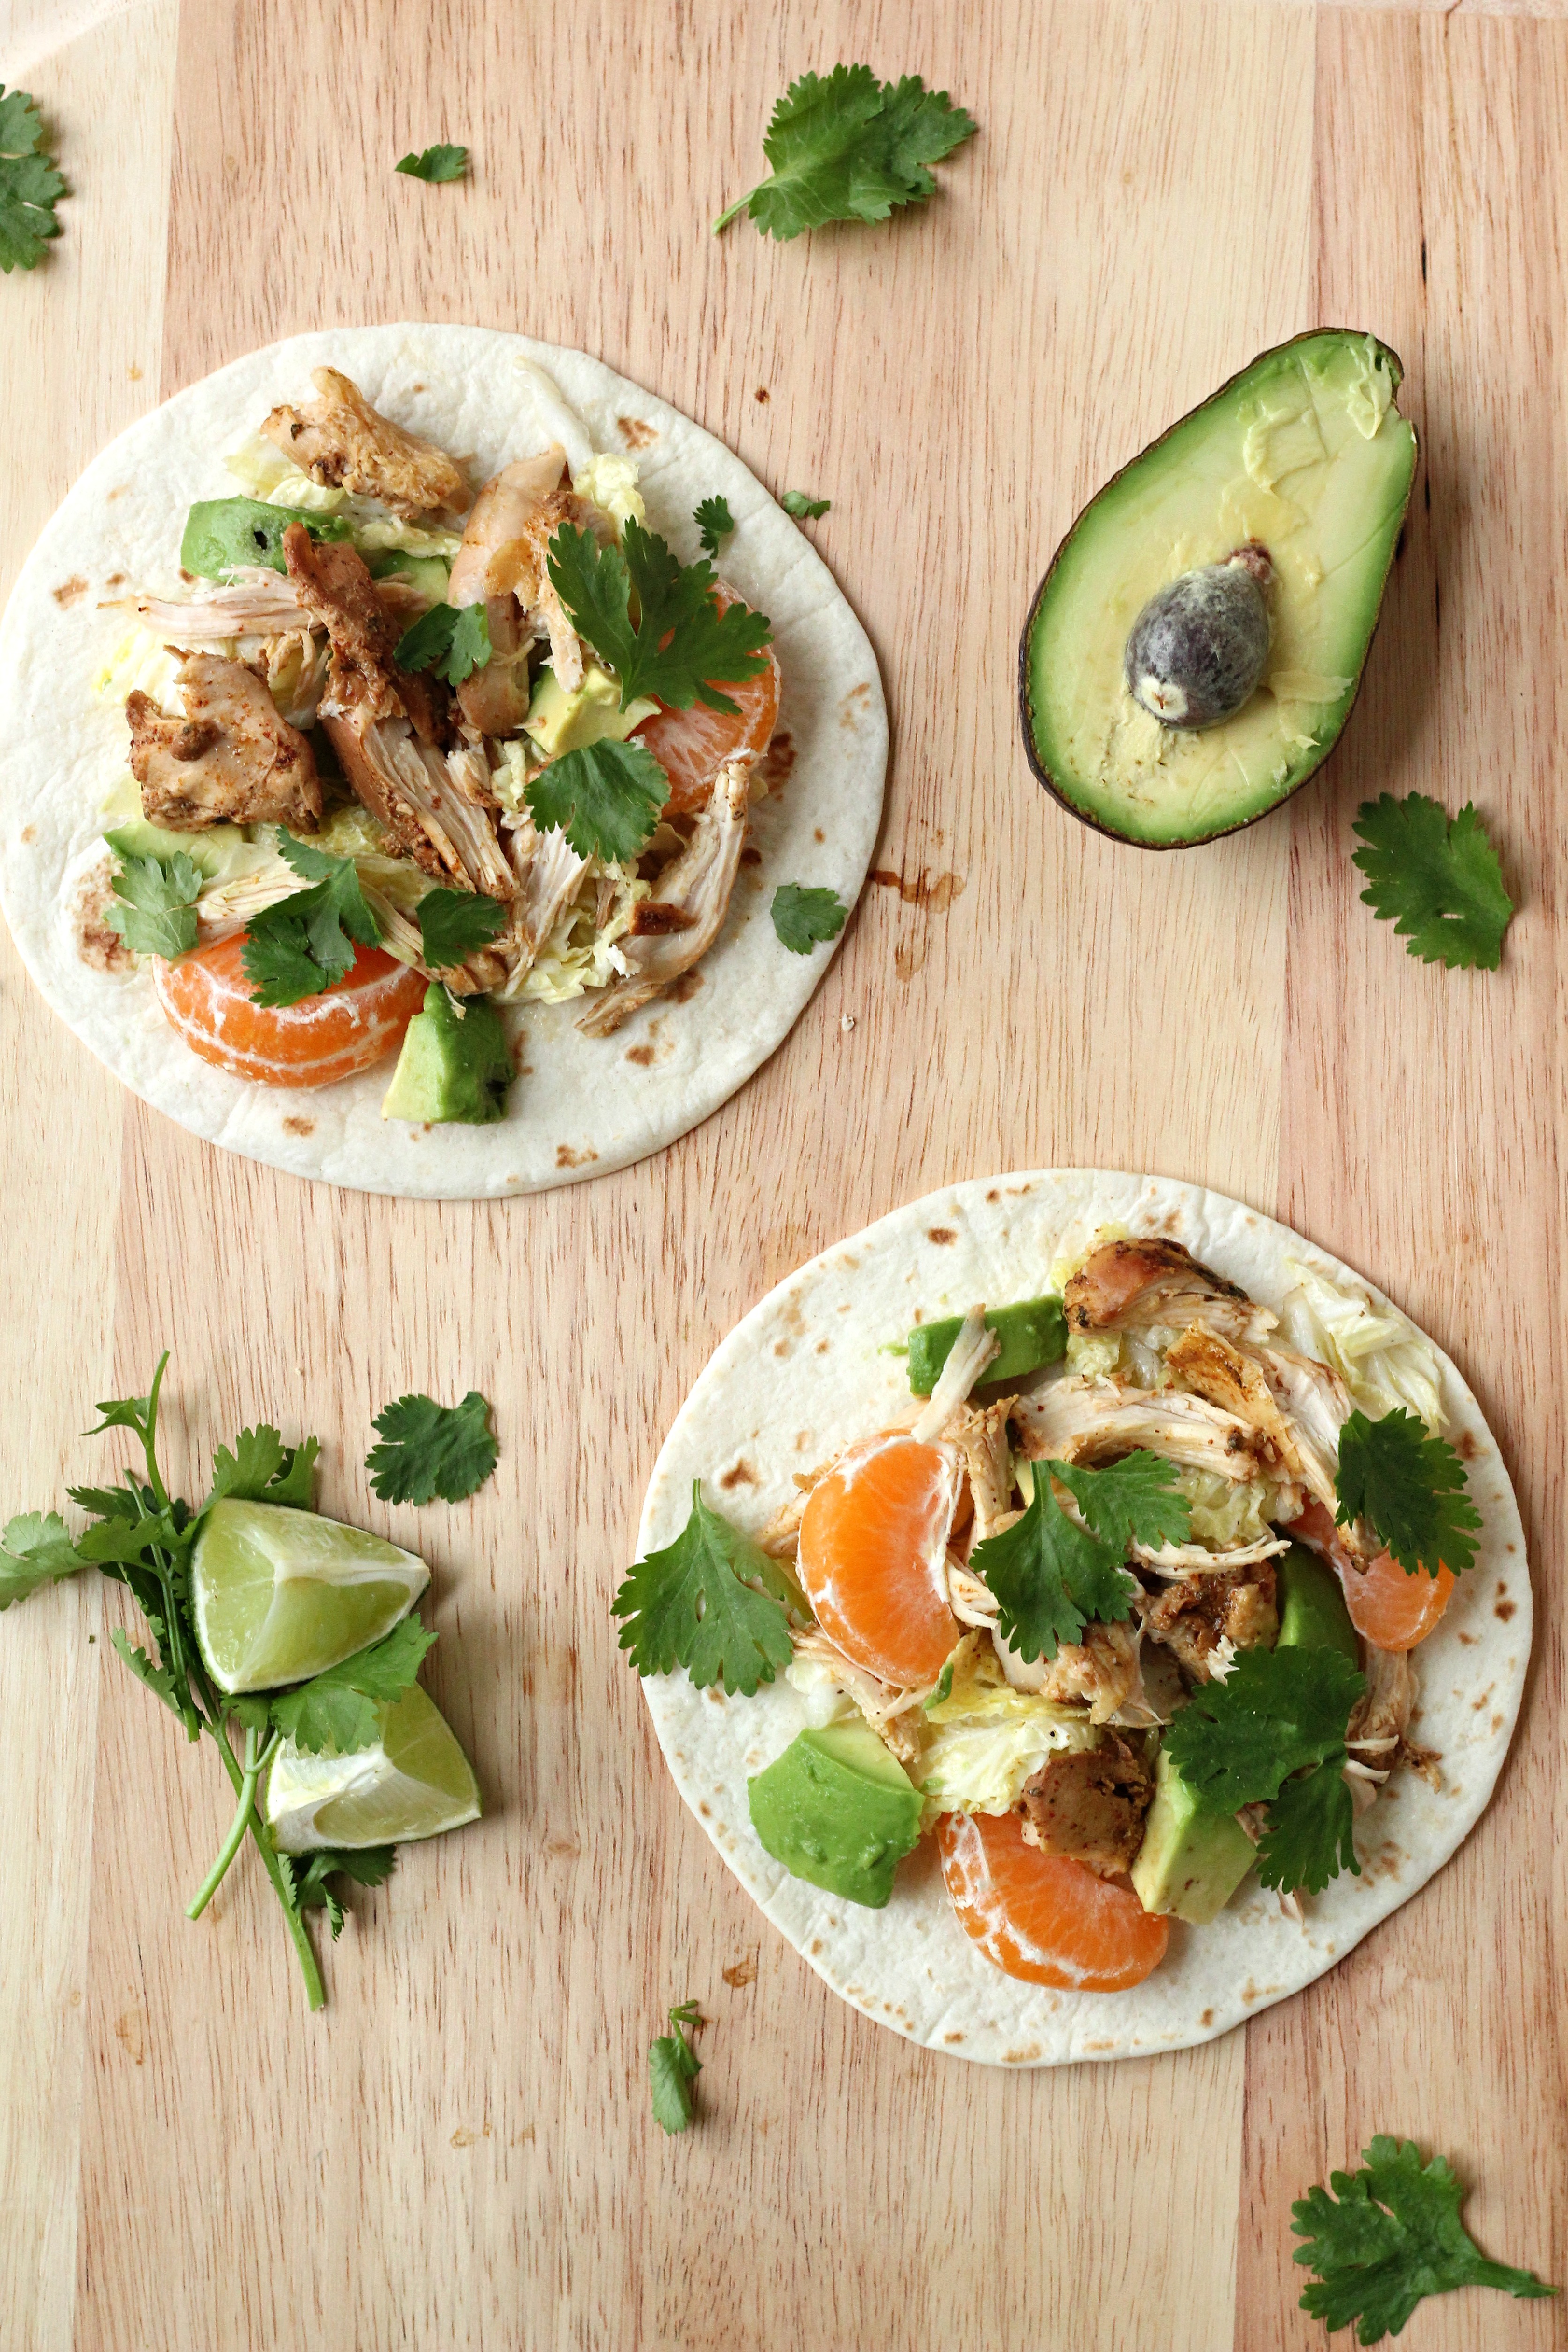 These Crispy Chicken Paleo Tacos are AMAZING! A perfect weeknight meal. 